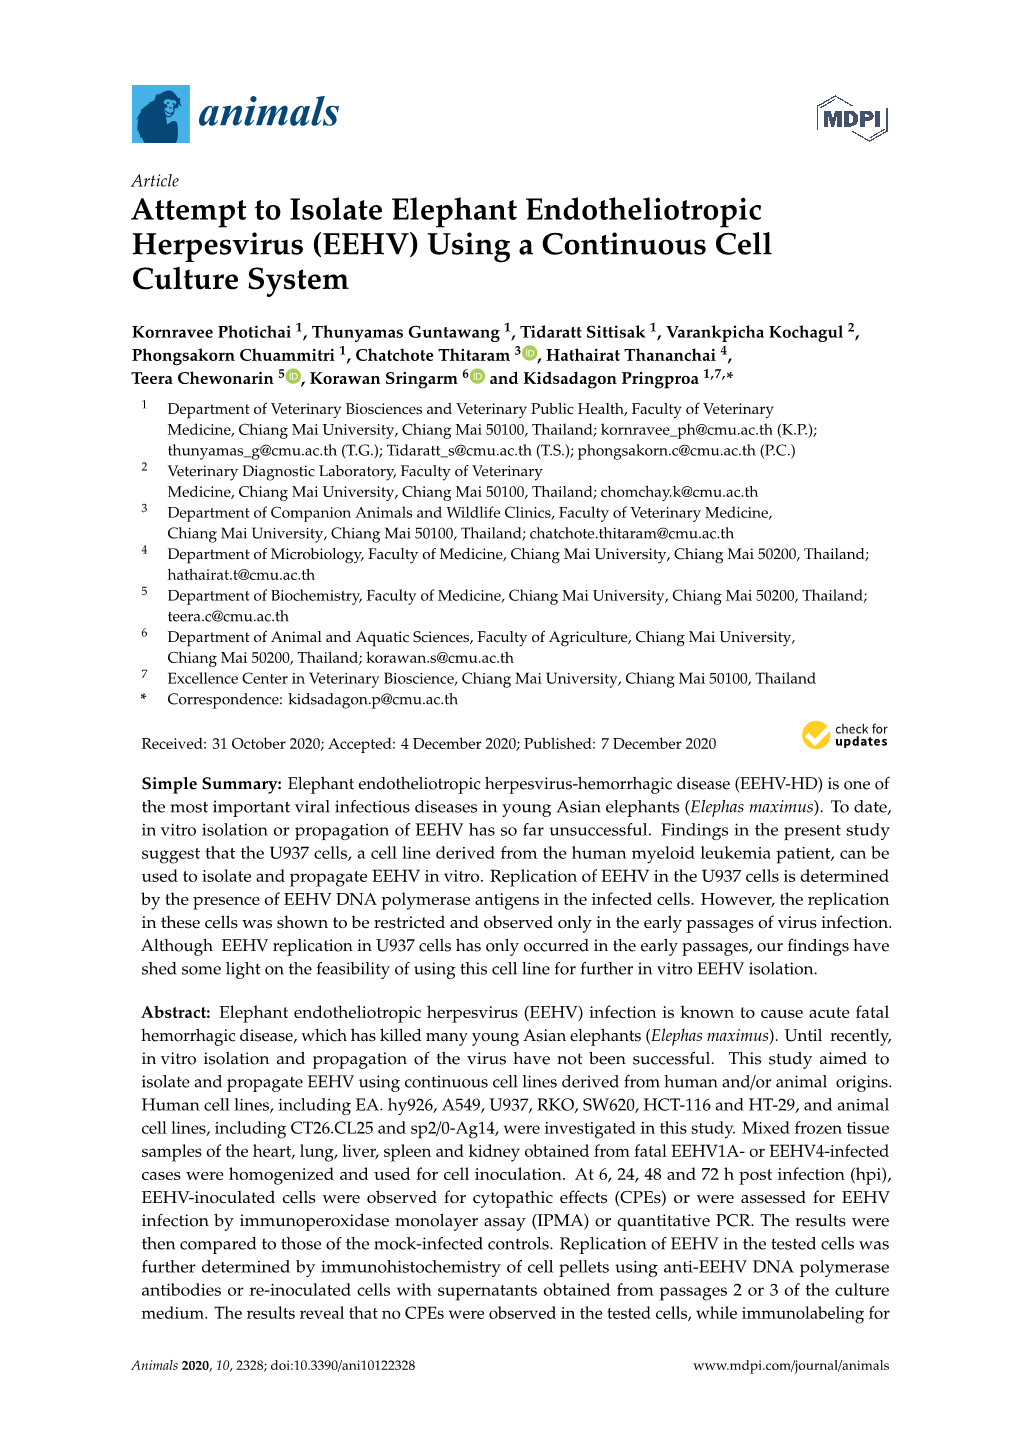 EEHV) Using a Continuous Cell Culture System